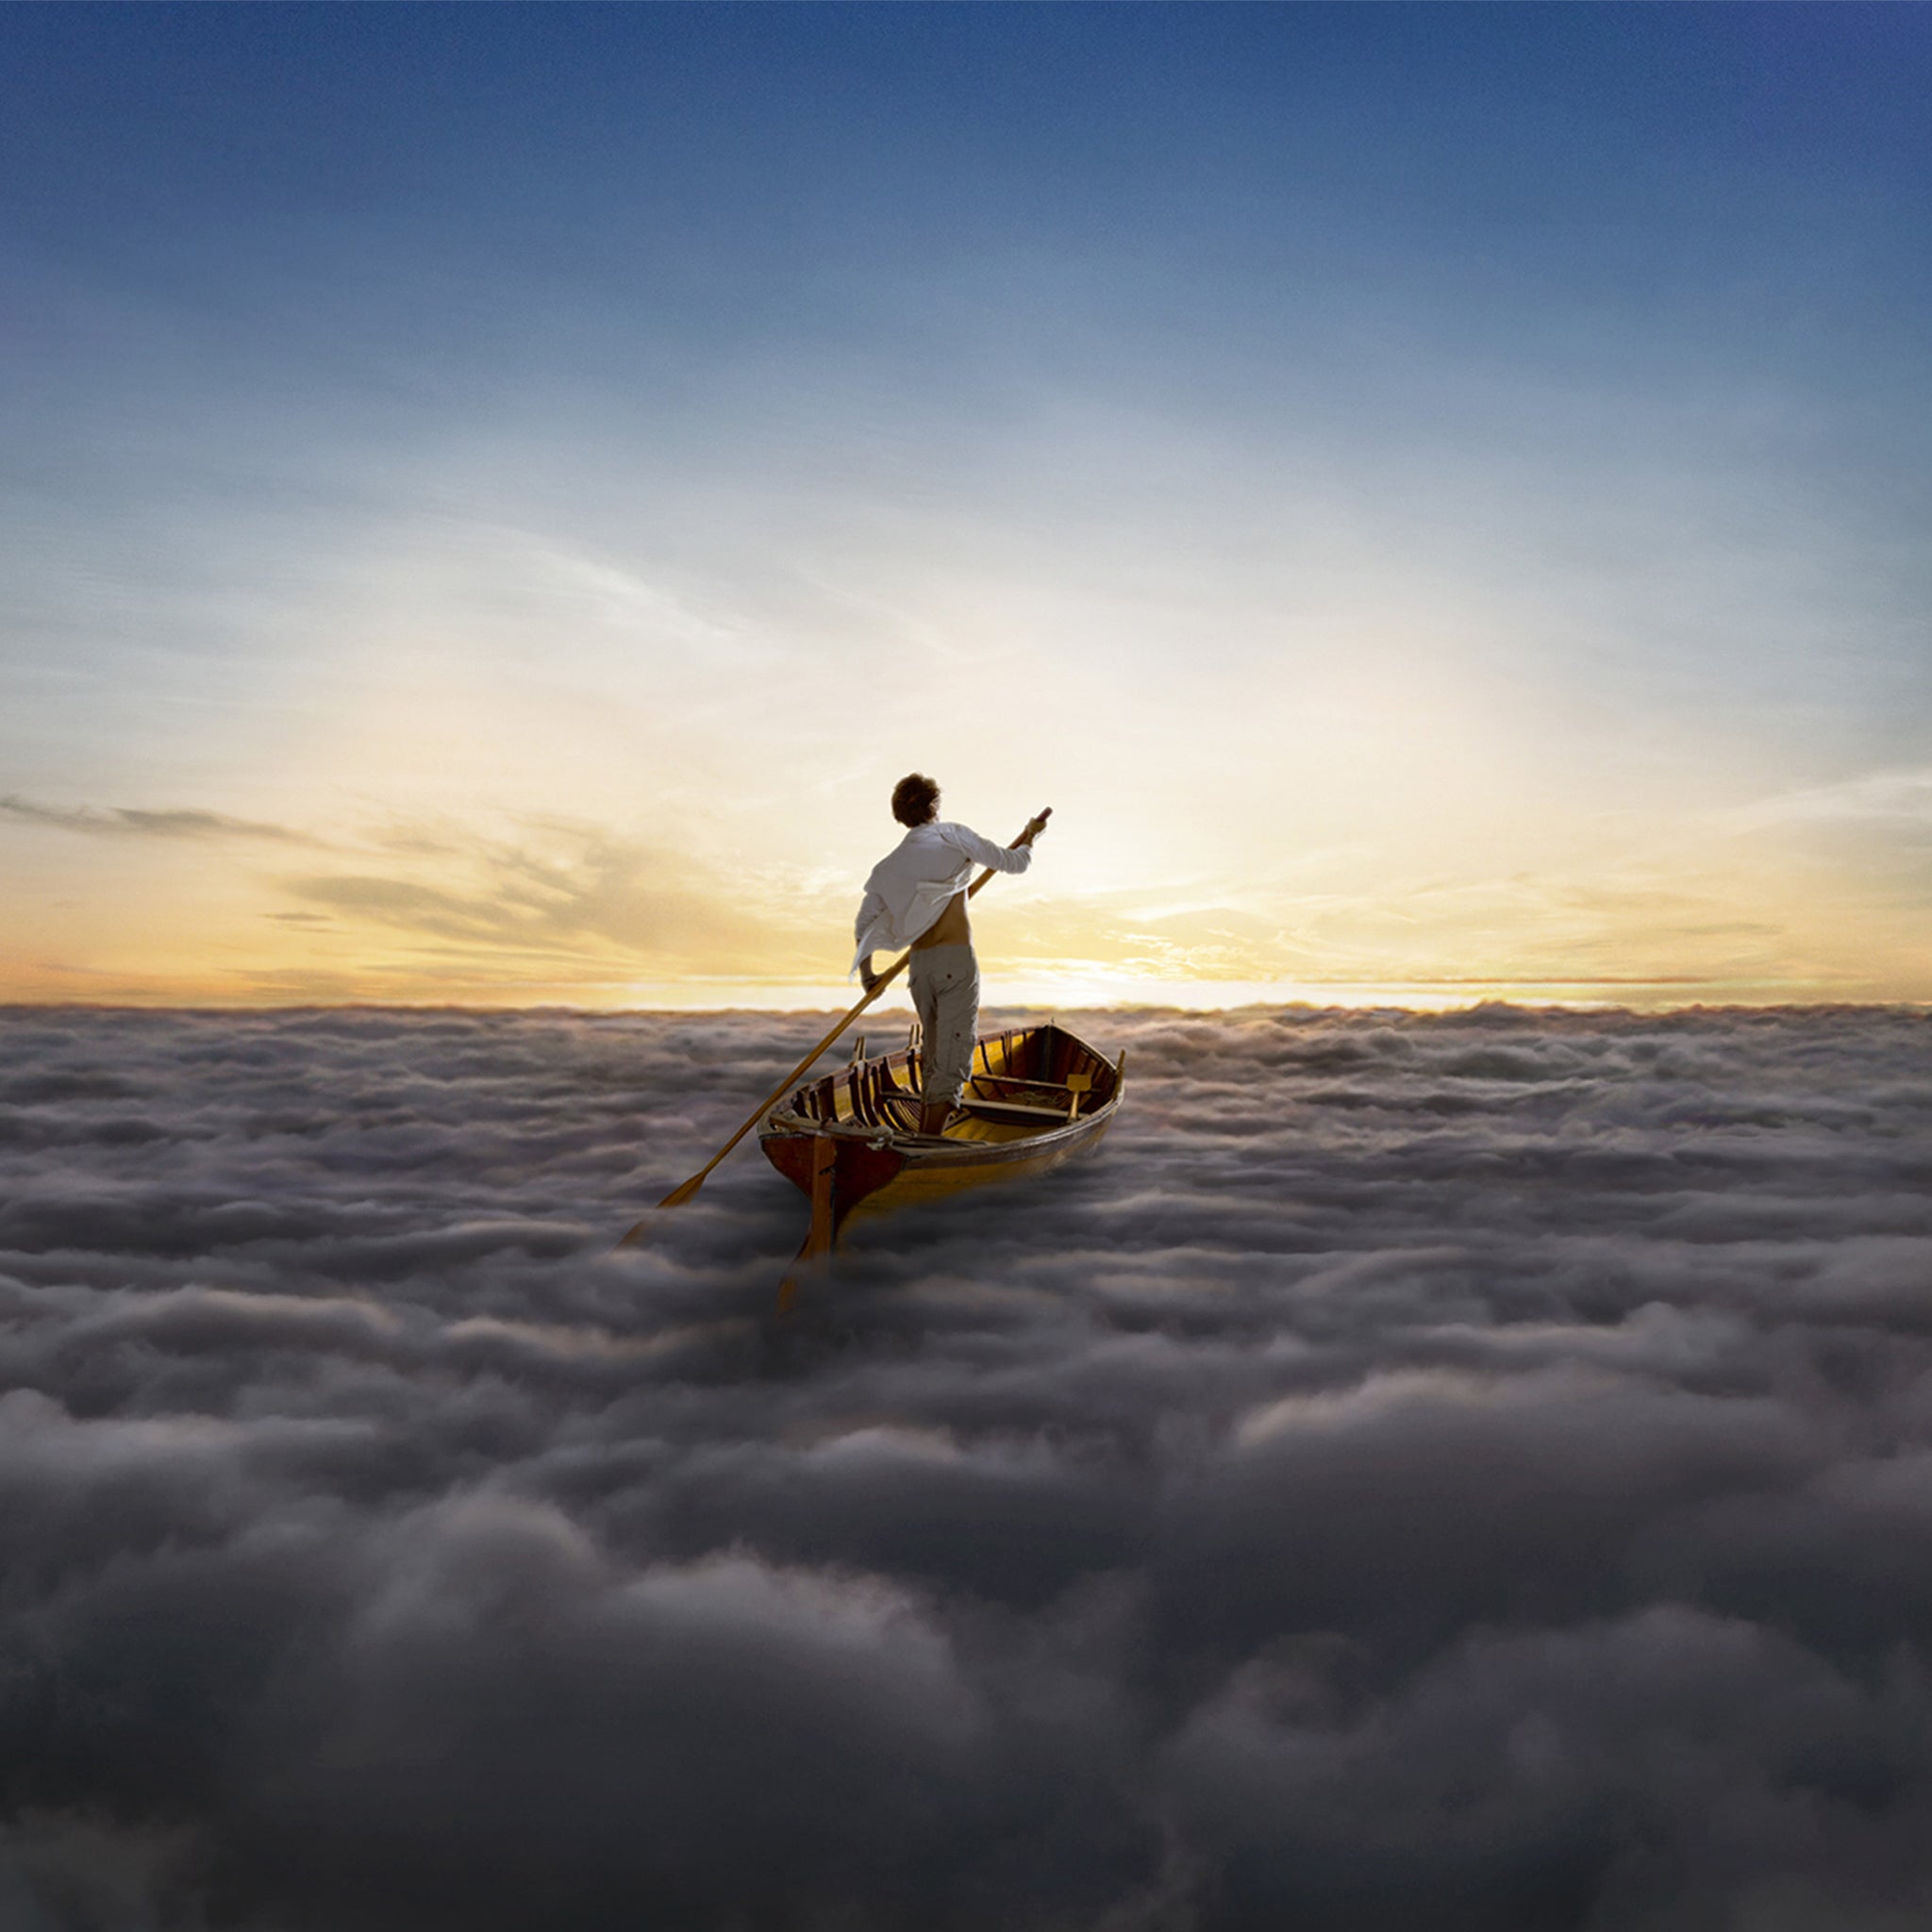 The cover art for new Pink Floyd album The Endless River